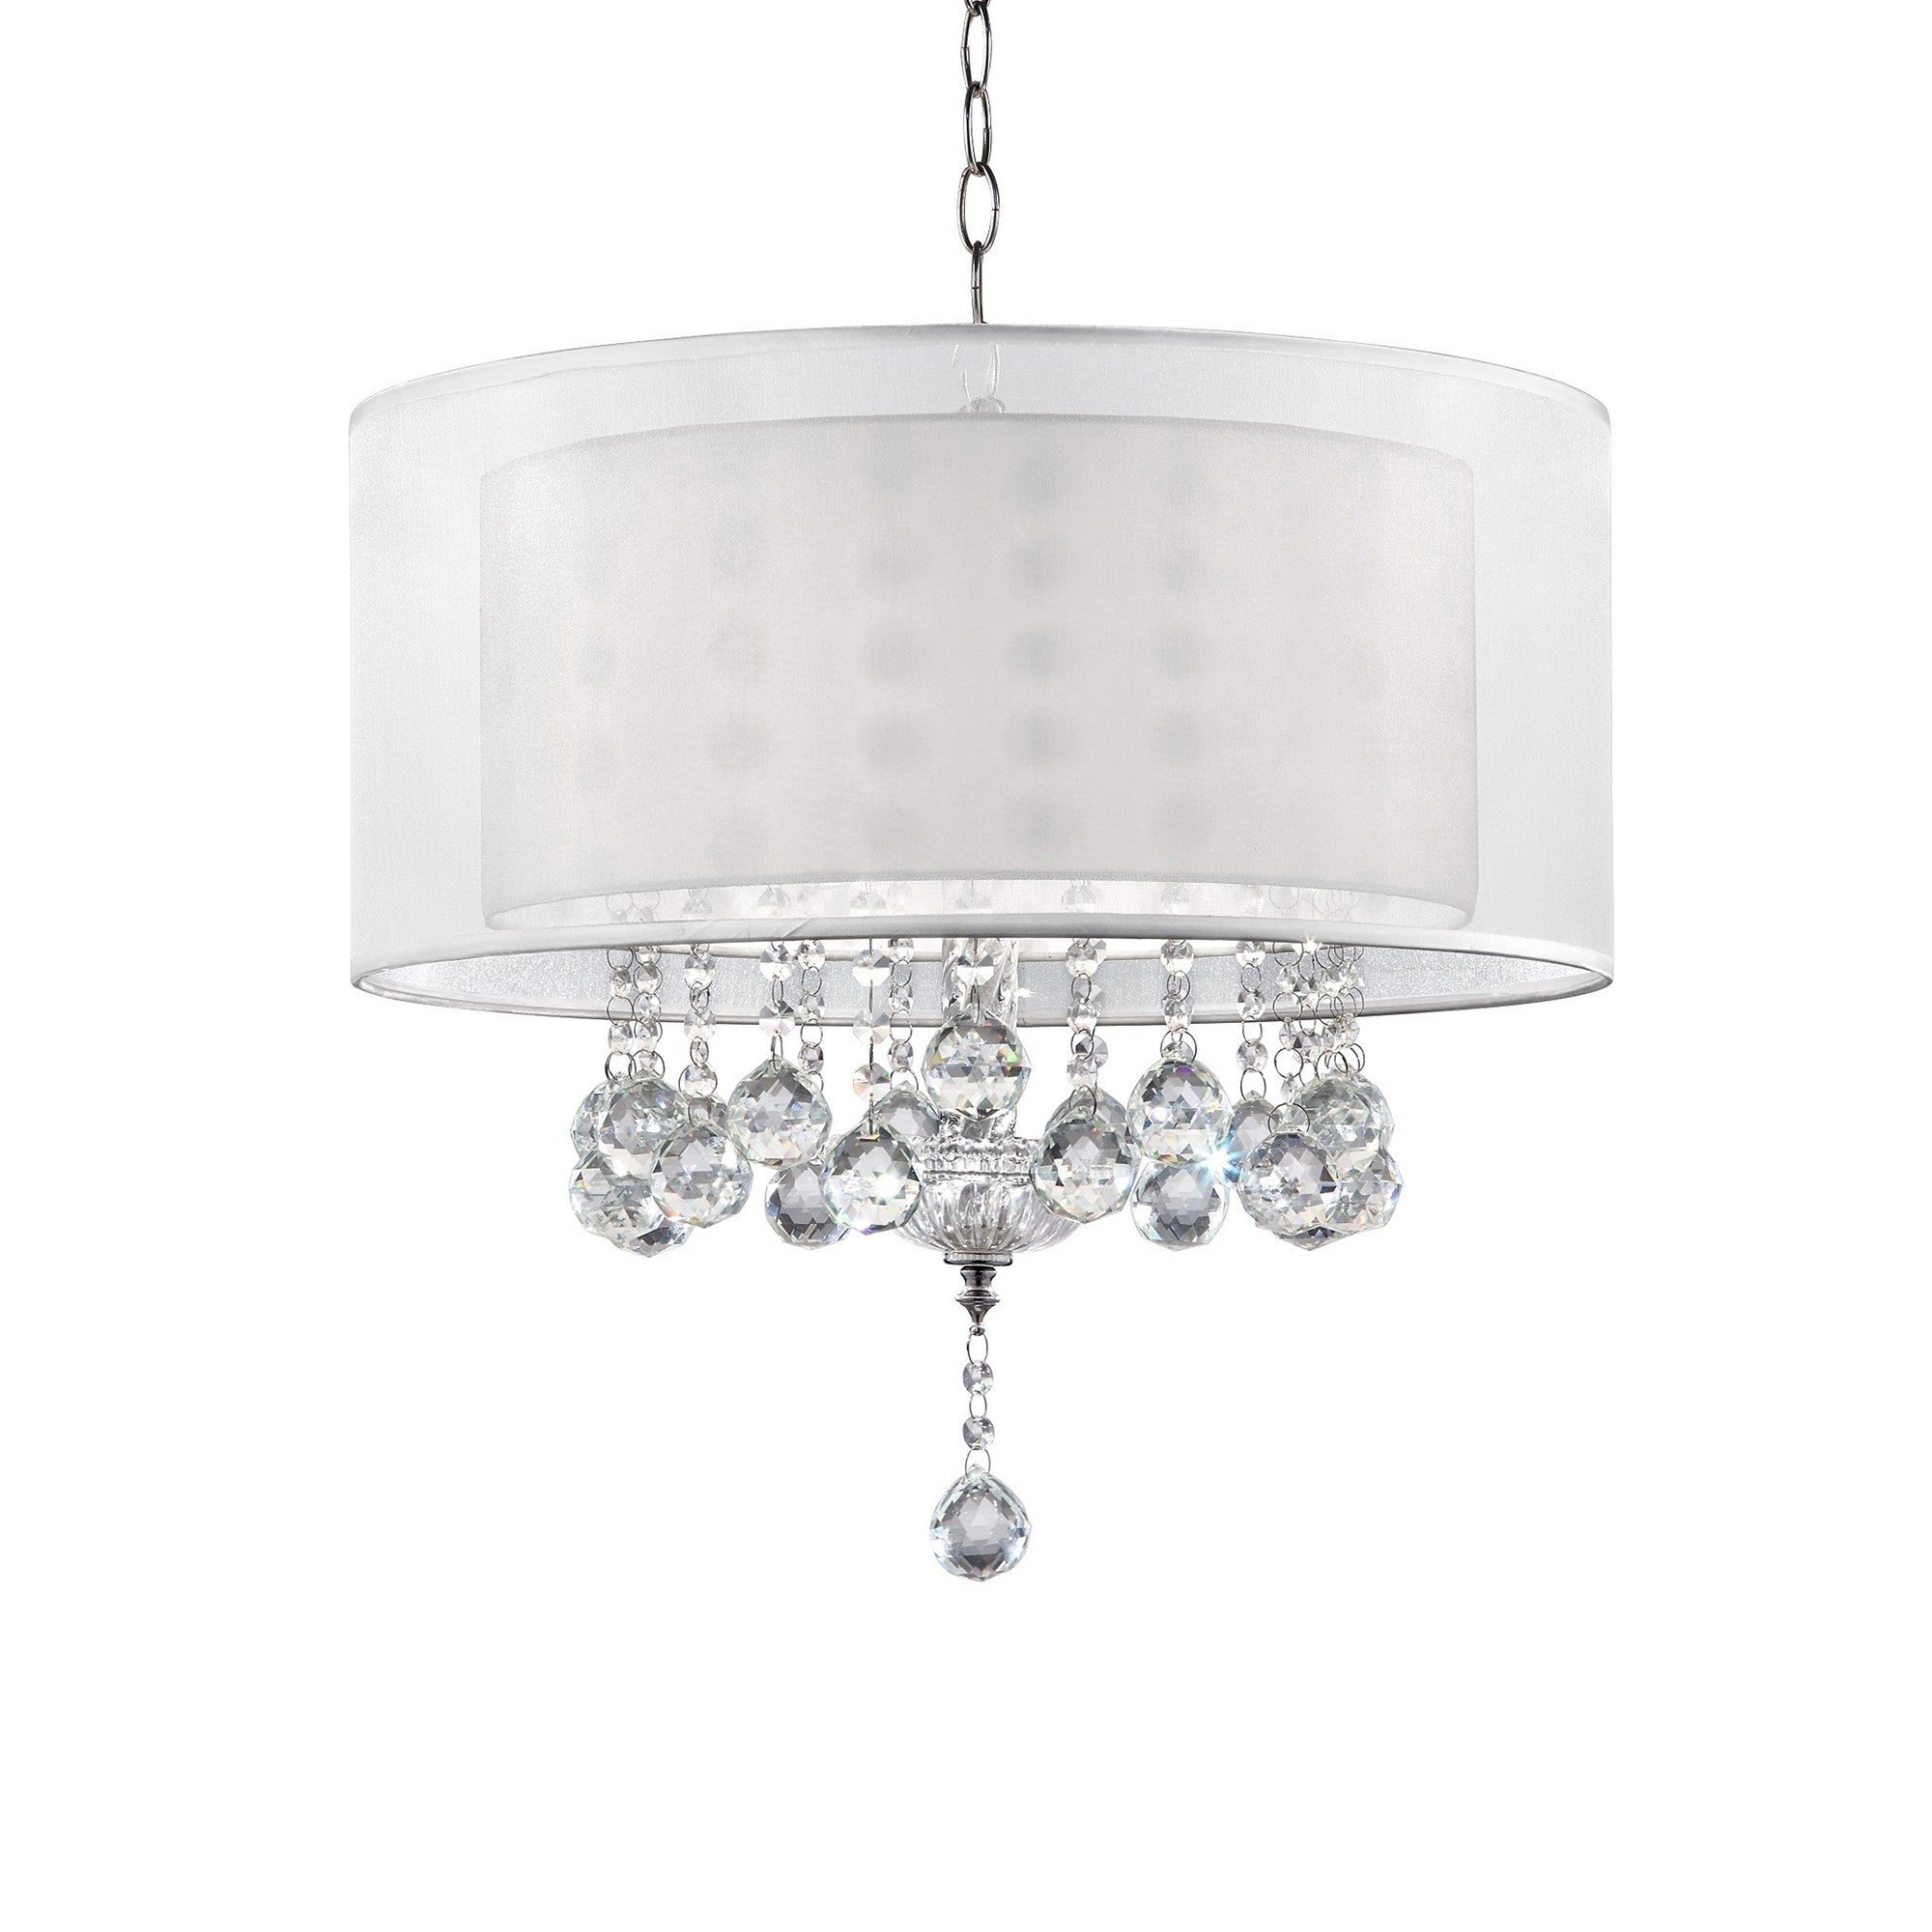 Chic Silver Ceiling Lamp with Crystal Accents and Silver Shade